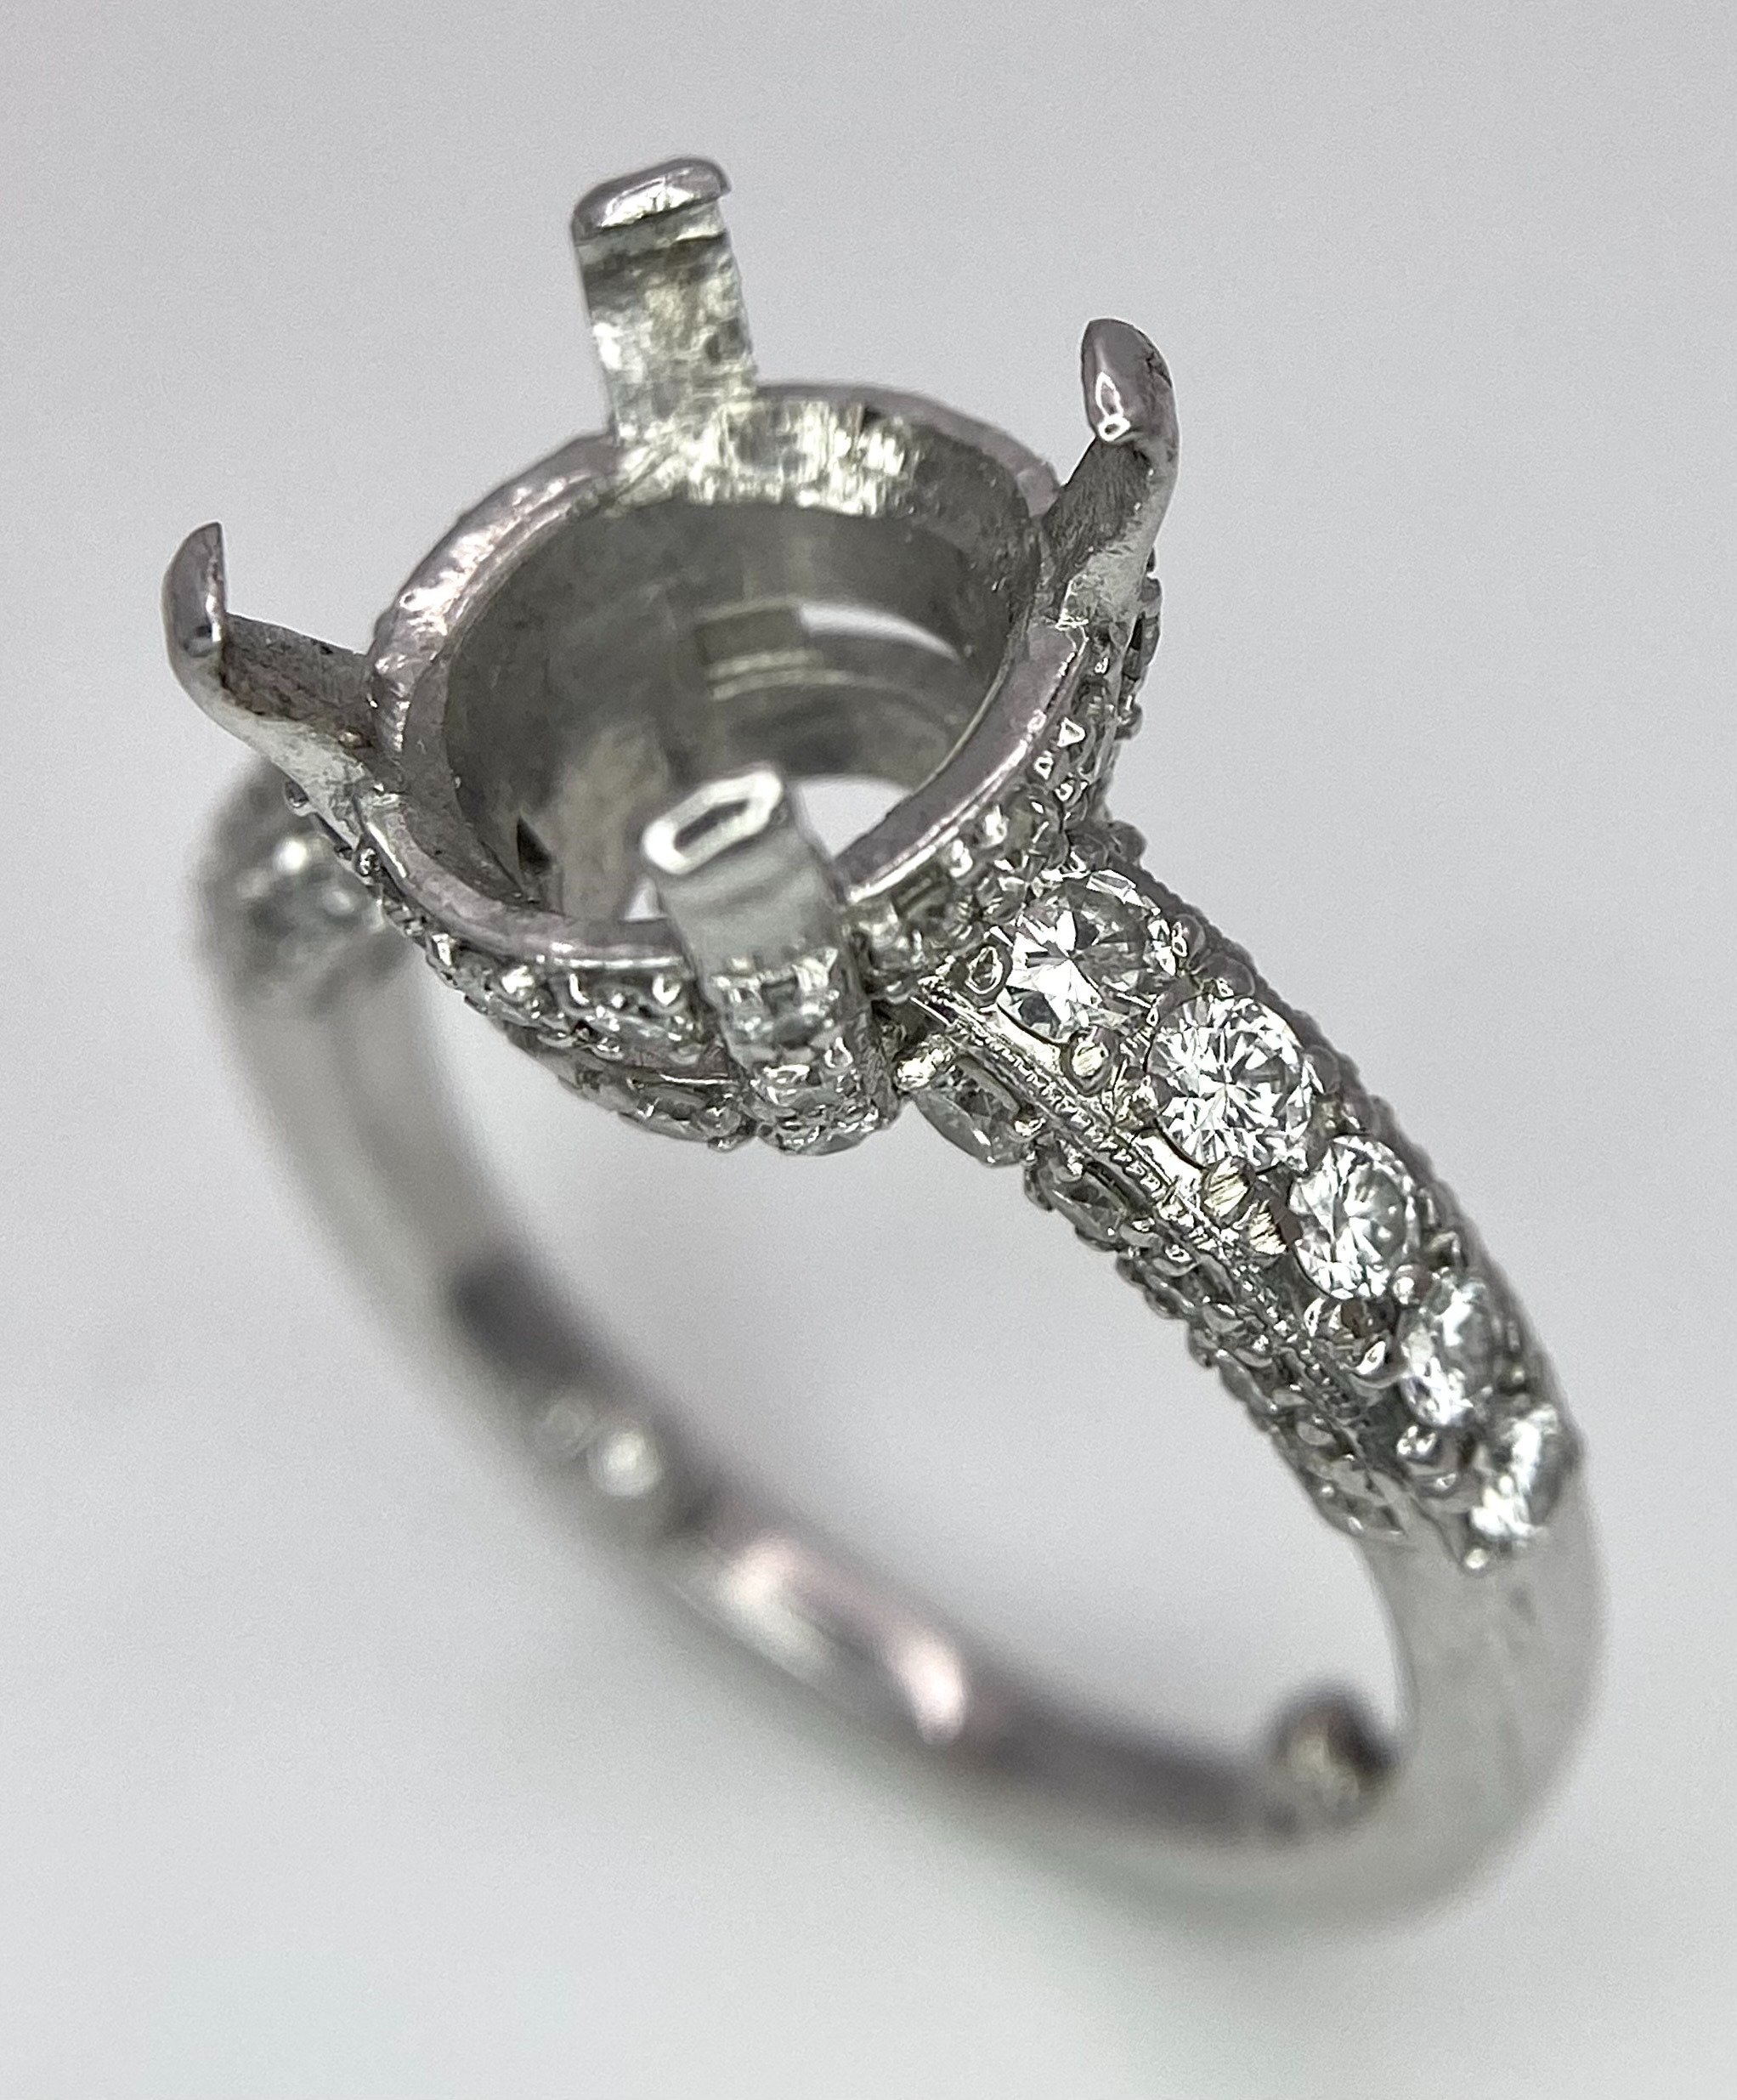 AN 18K WHITE GOLD 4 CLAW SINGLE STONE RING WITH DIAMOND SET BEZEL, SHOULDERS AND SIDES - Ready to - Image 2 of 6